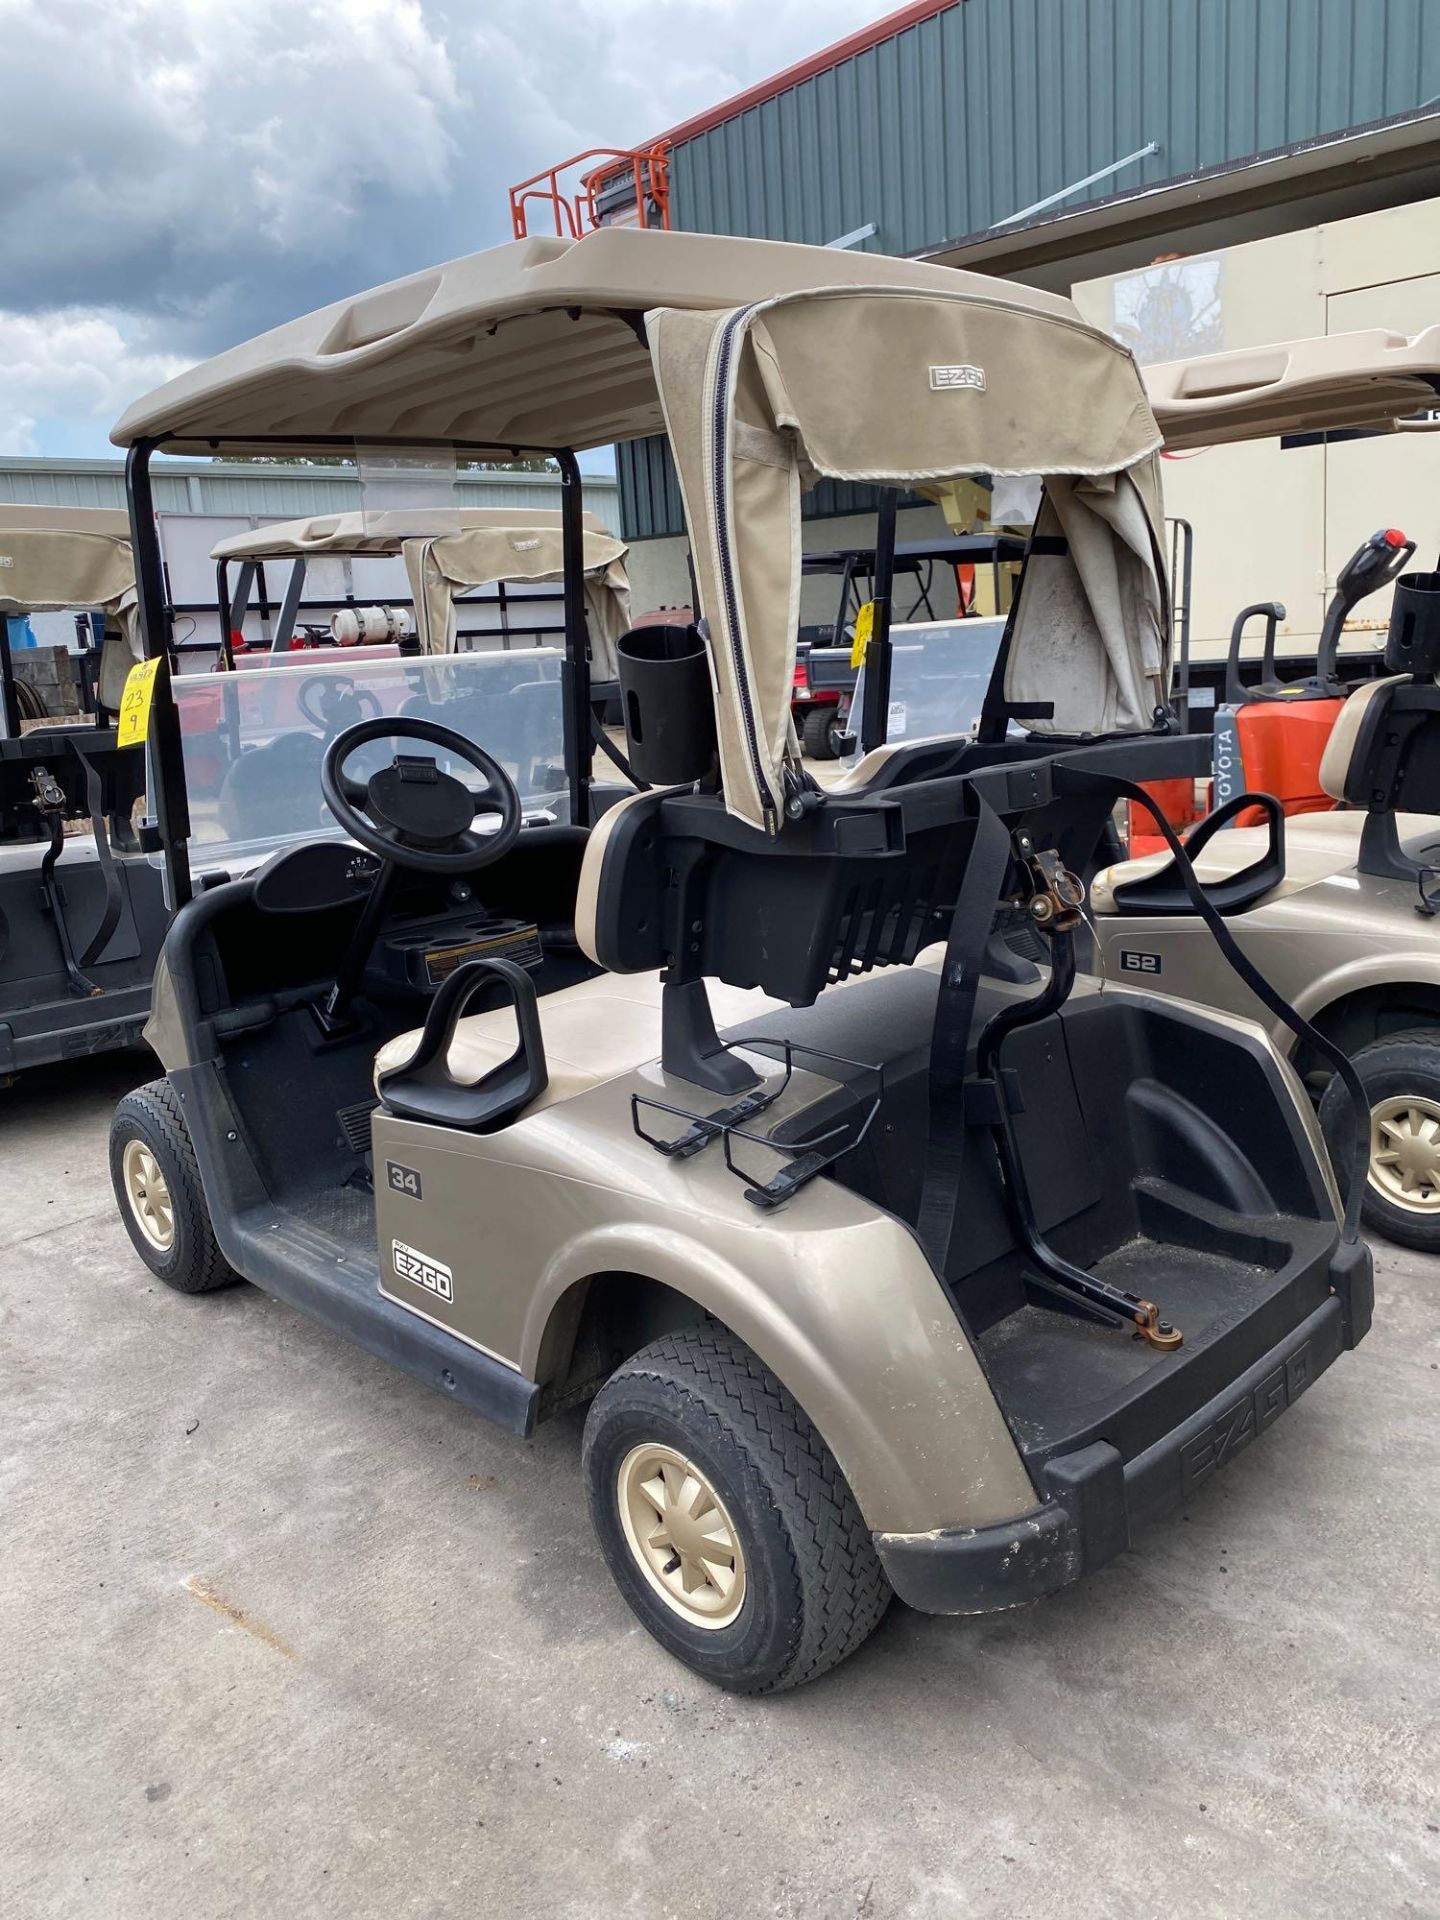 2016 EZ-GO RXV ELECTRIC GOLF CART WITH TROJAN HYDROLINK WATERING SYSTEM BATTERIES, EX-GO DELTA-Q SC- - Image 4 of 7